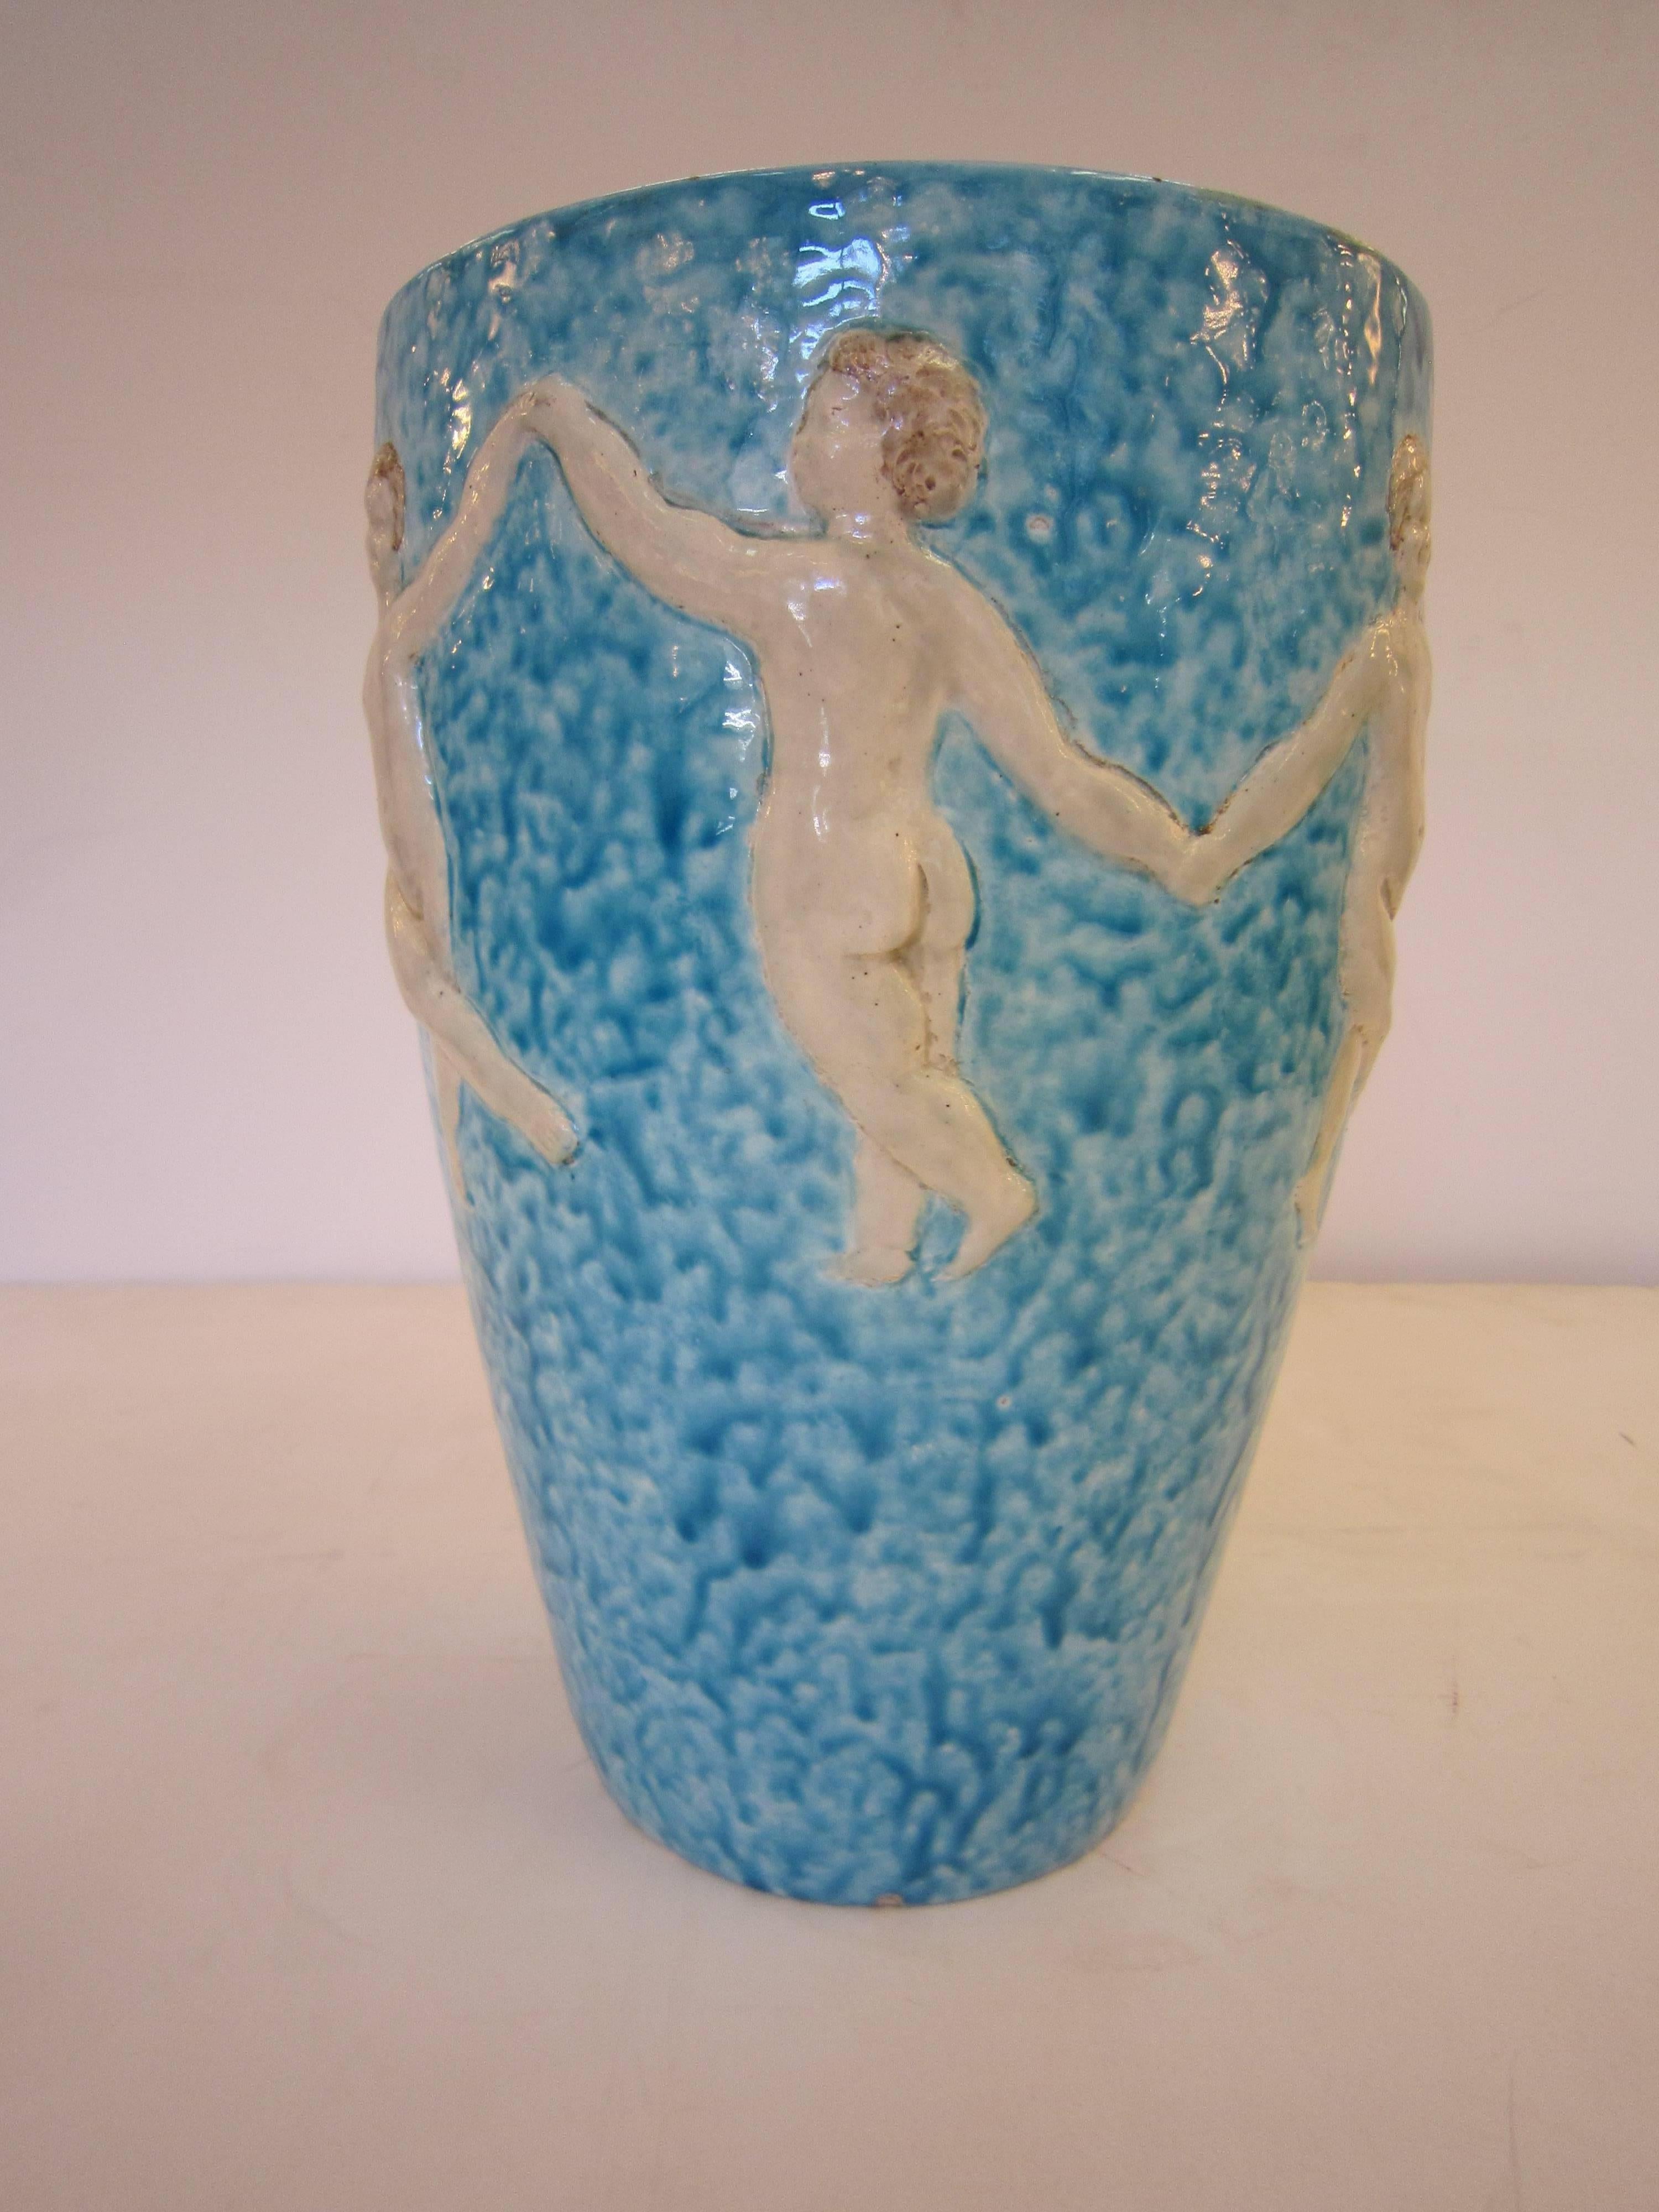 French Modern pottery vase in mottled turquoise and creamy white glaze depicting children dancing and frolicking while holding hands.
Fine details overall with sculptural bas-relief effect. Ceramic, longwy, Boch freres.
Signed: R. Maynard.
  